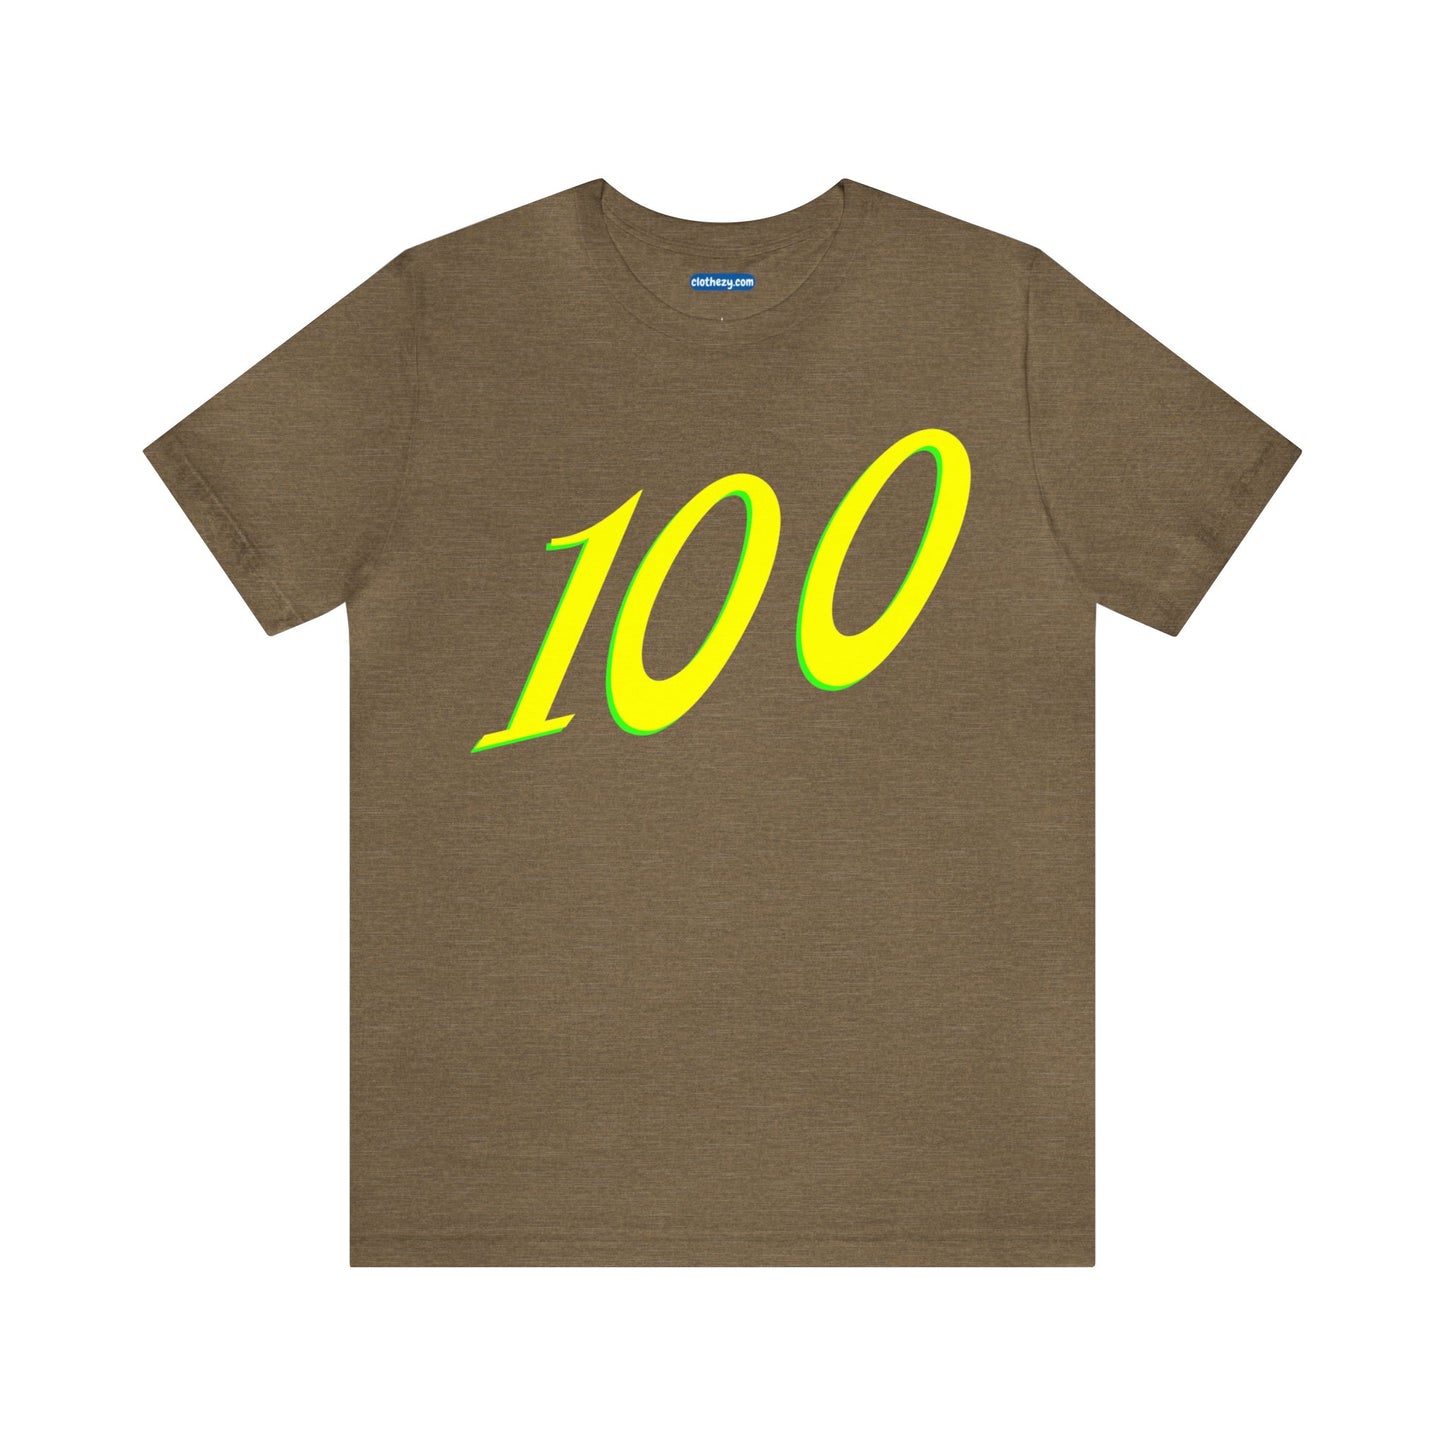 Number 100 Design - Soft Cotton Tee for birthdays and celebrations, Gift for friends and family, Multiple Options by clothezy.com in Olive Heather Size Small - Buy Now